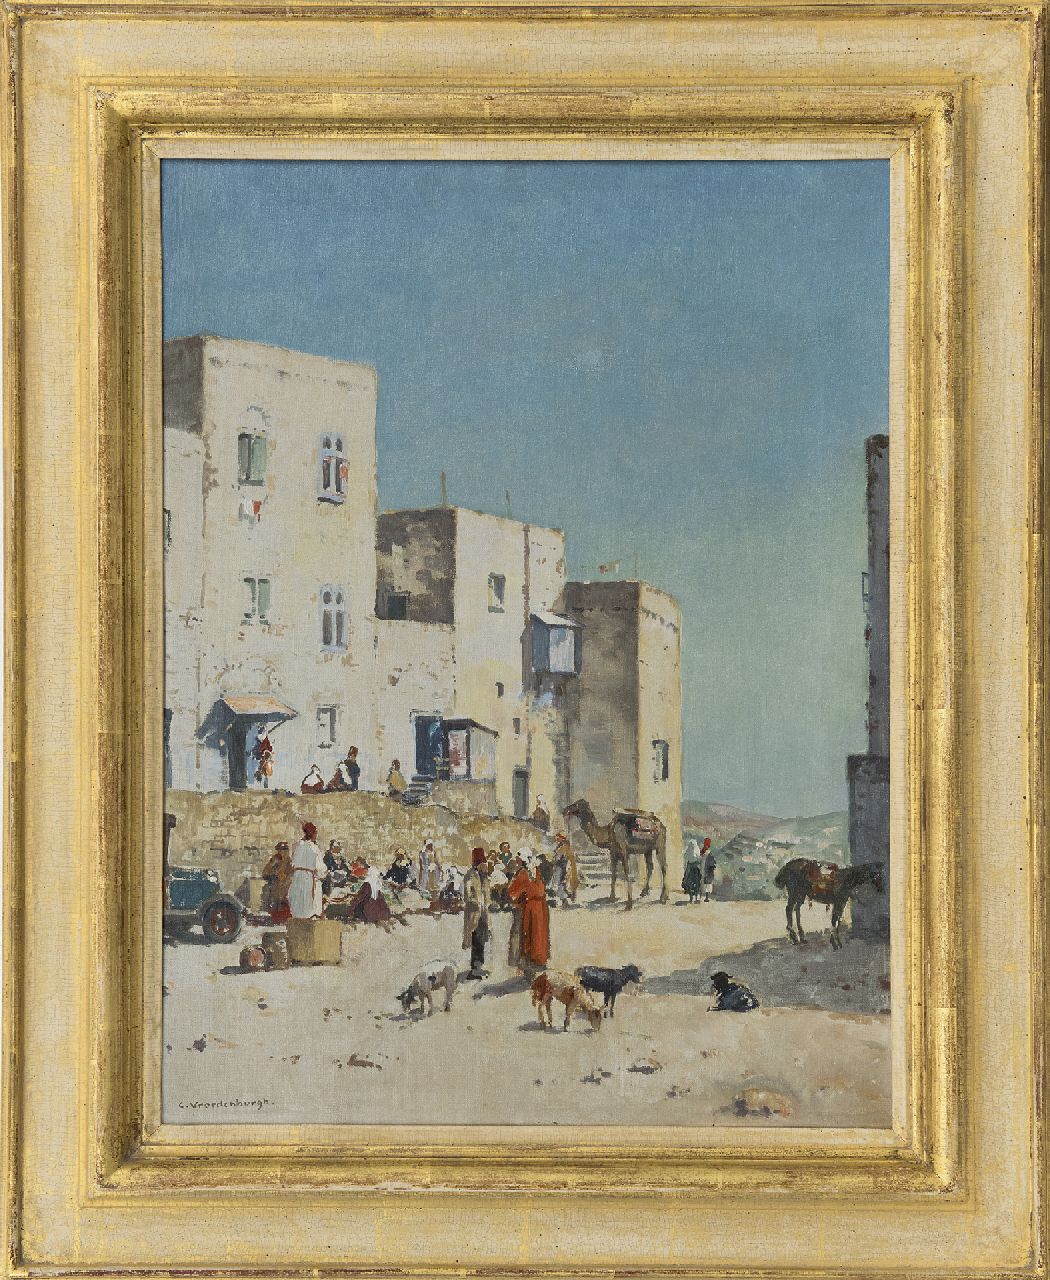 Vreedenburgh C.  | Cornelis Vreedenburgh | Paintings offered for sale | A village in Bethlehem, Palestine, oil on canvas 50.9 x 38.2 cm, signed l.l. and painted ca. 1936